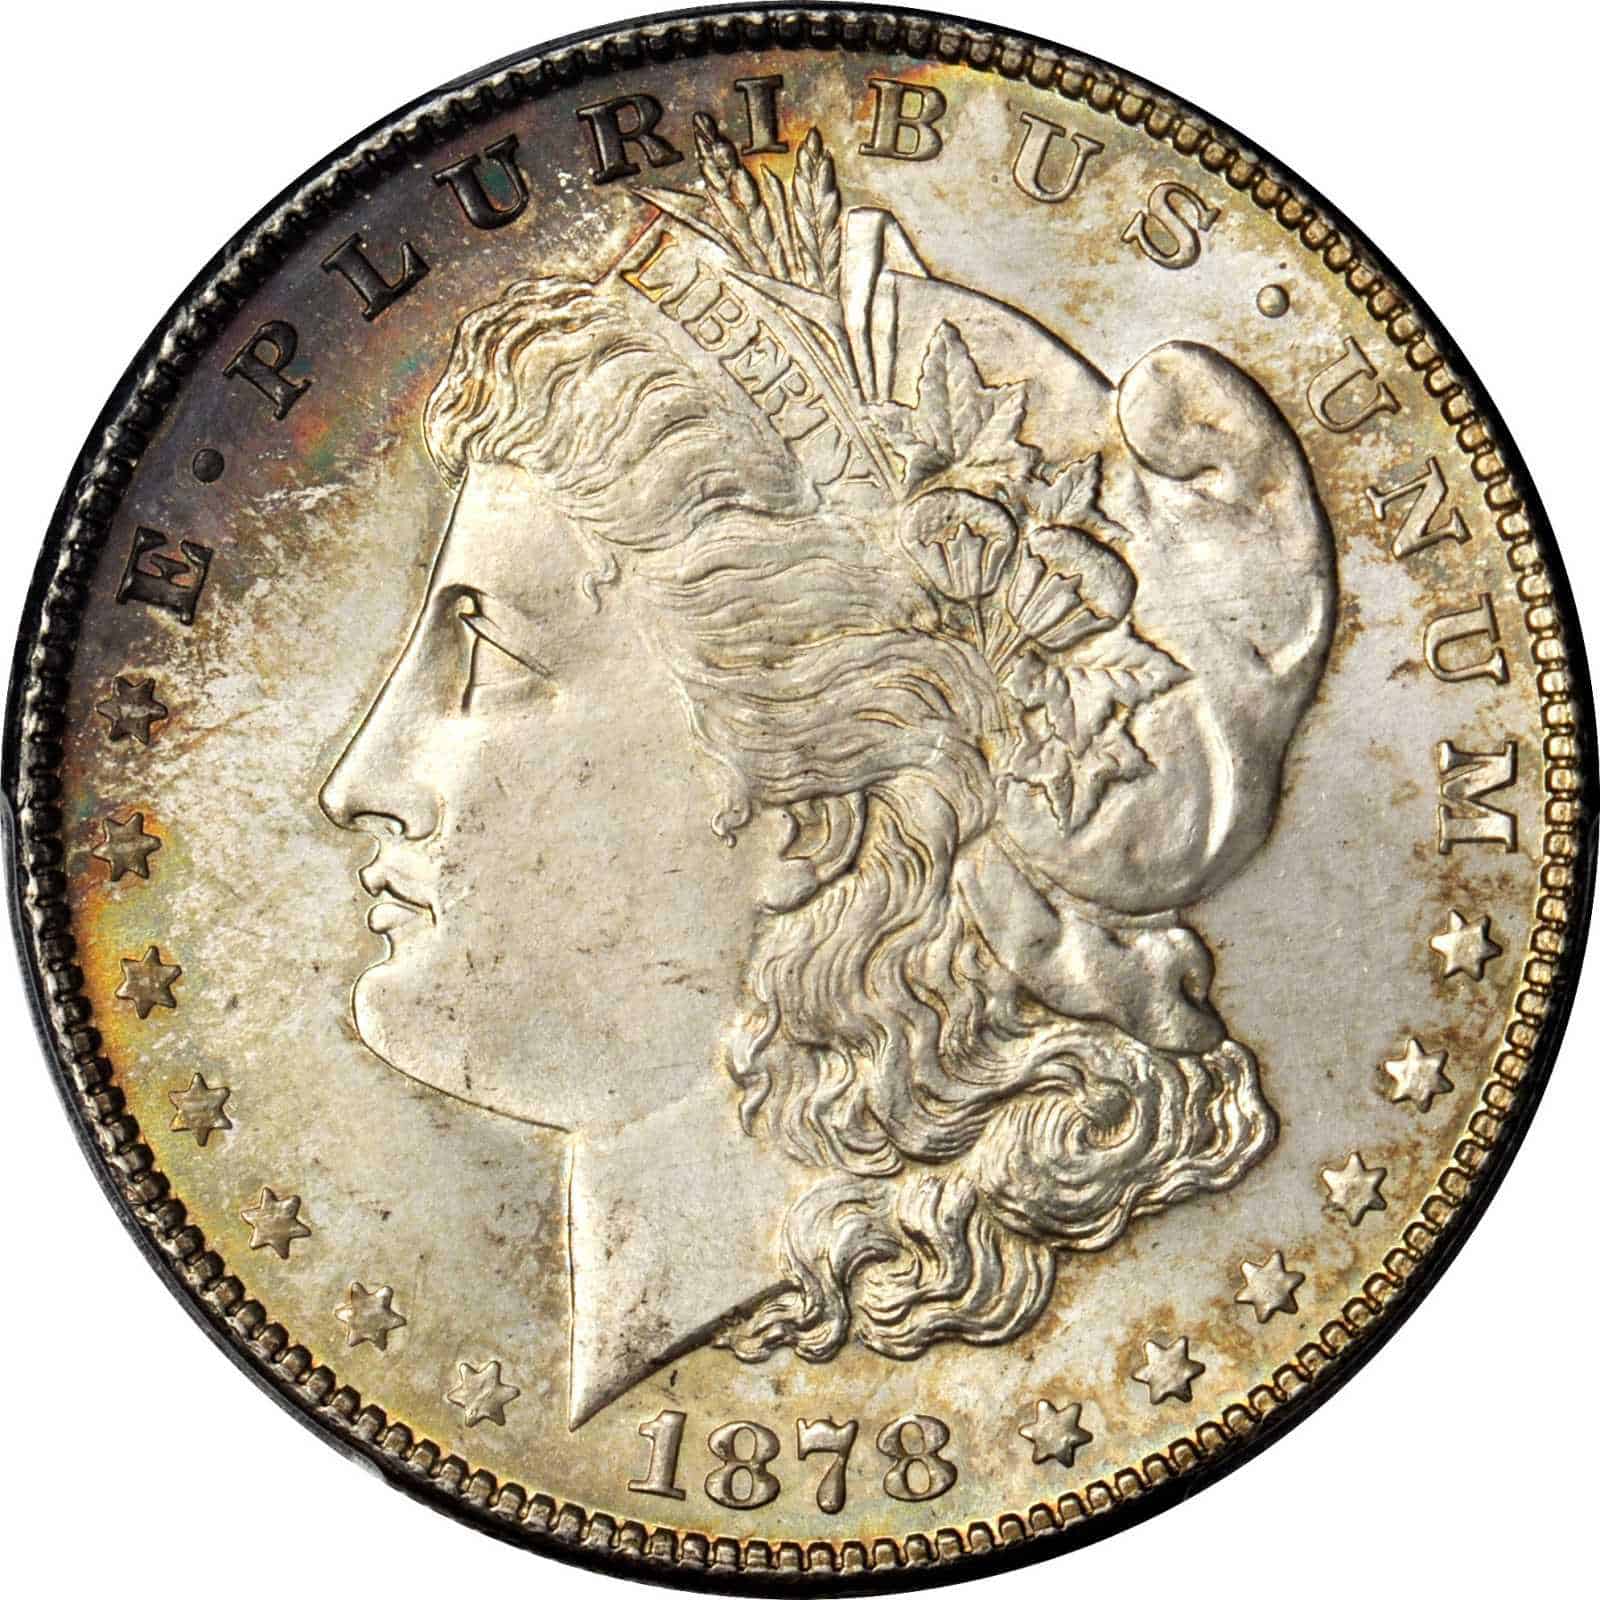 The Obverse of the 1878 Silver Morgan Dollar